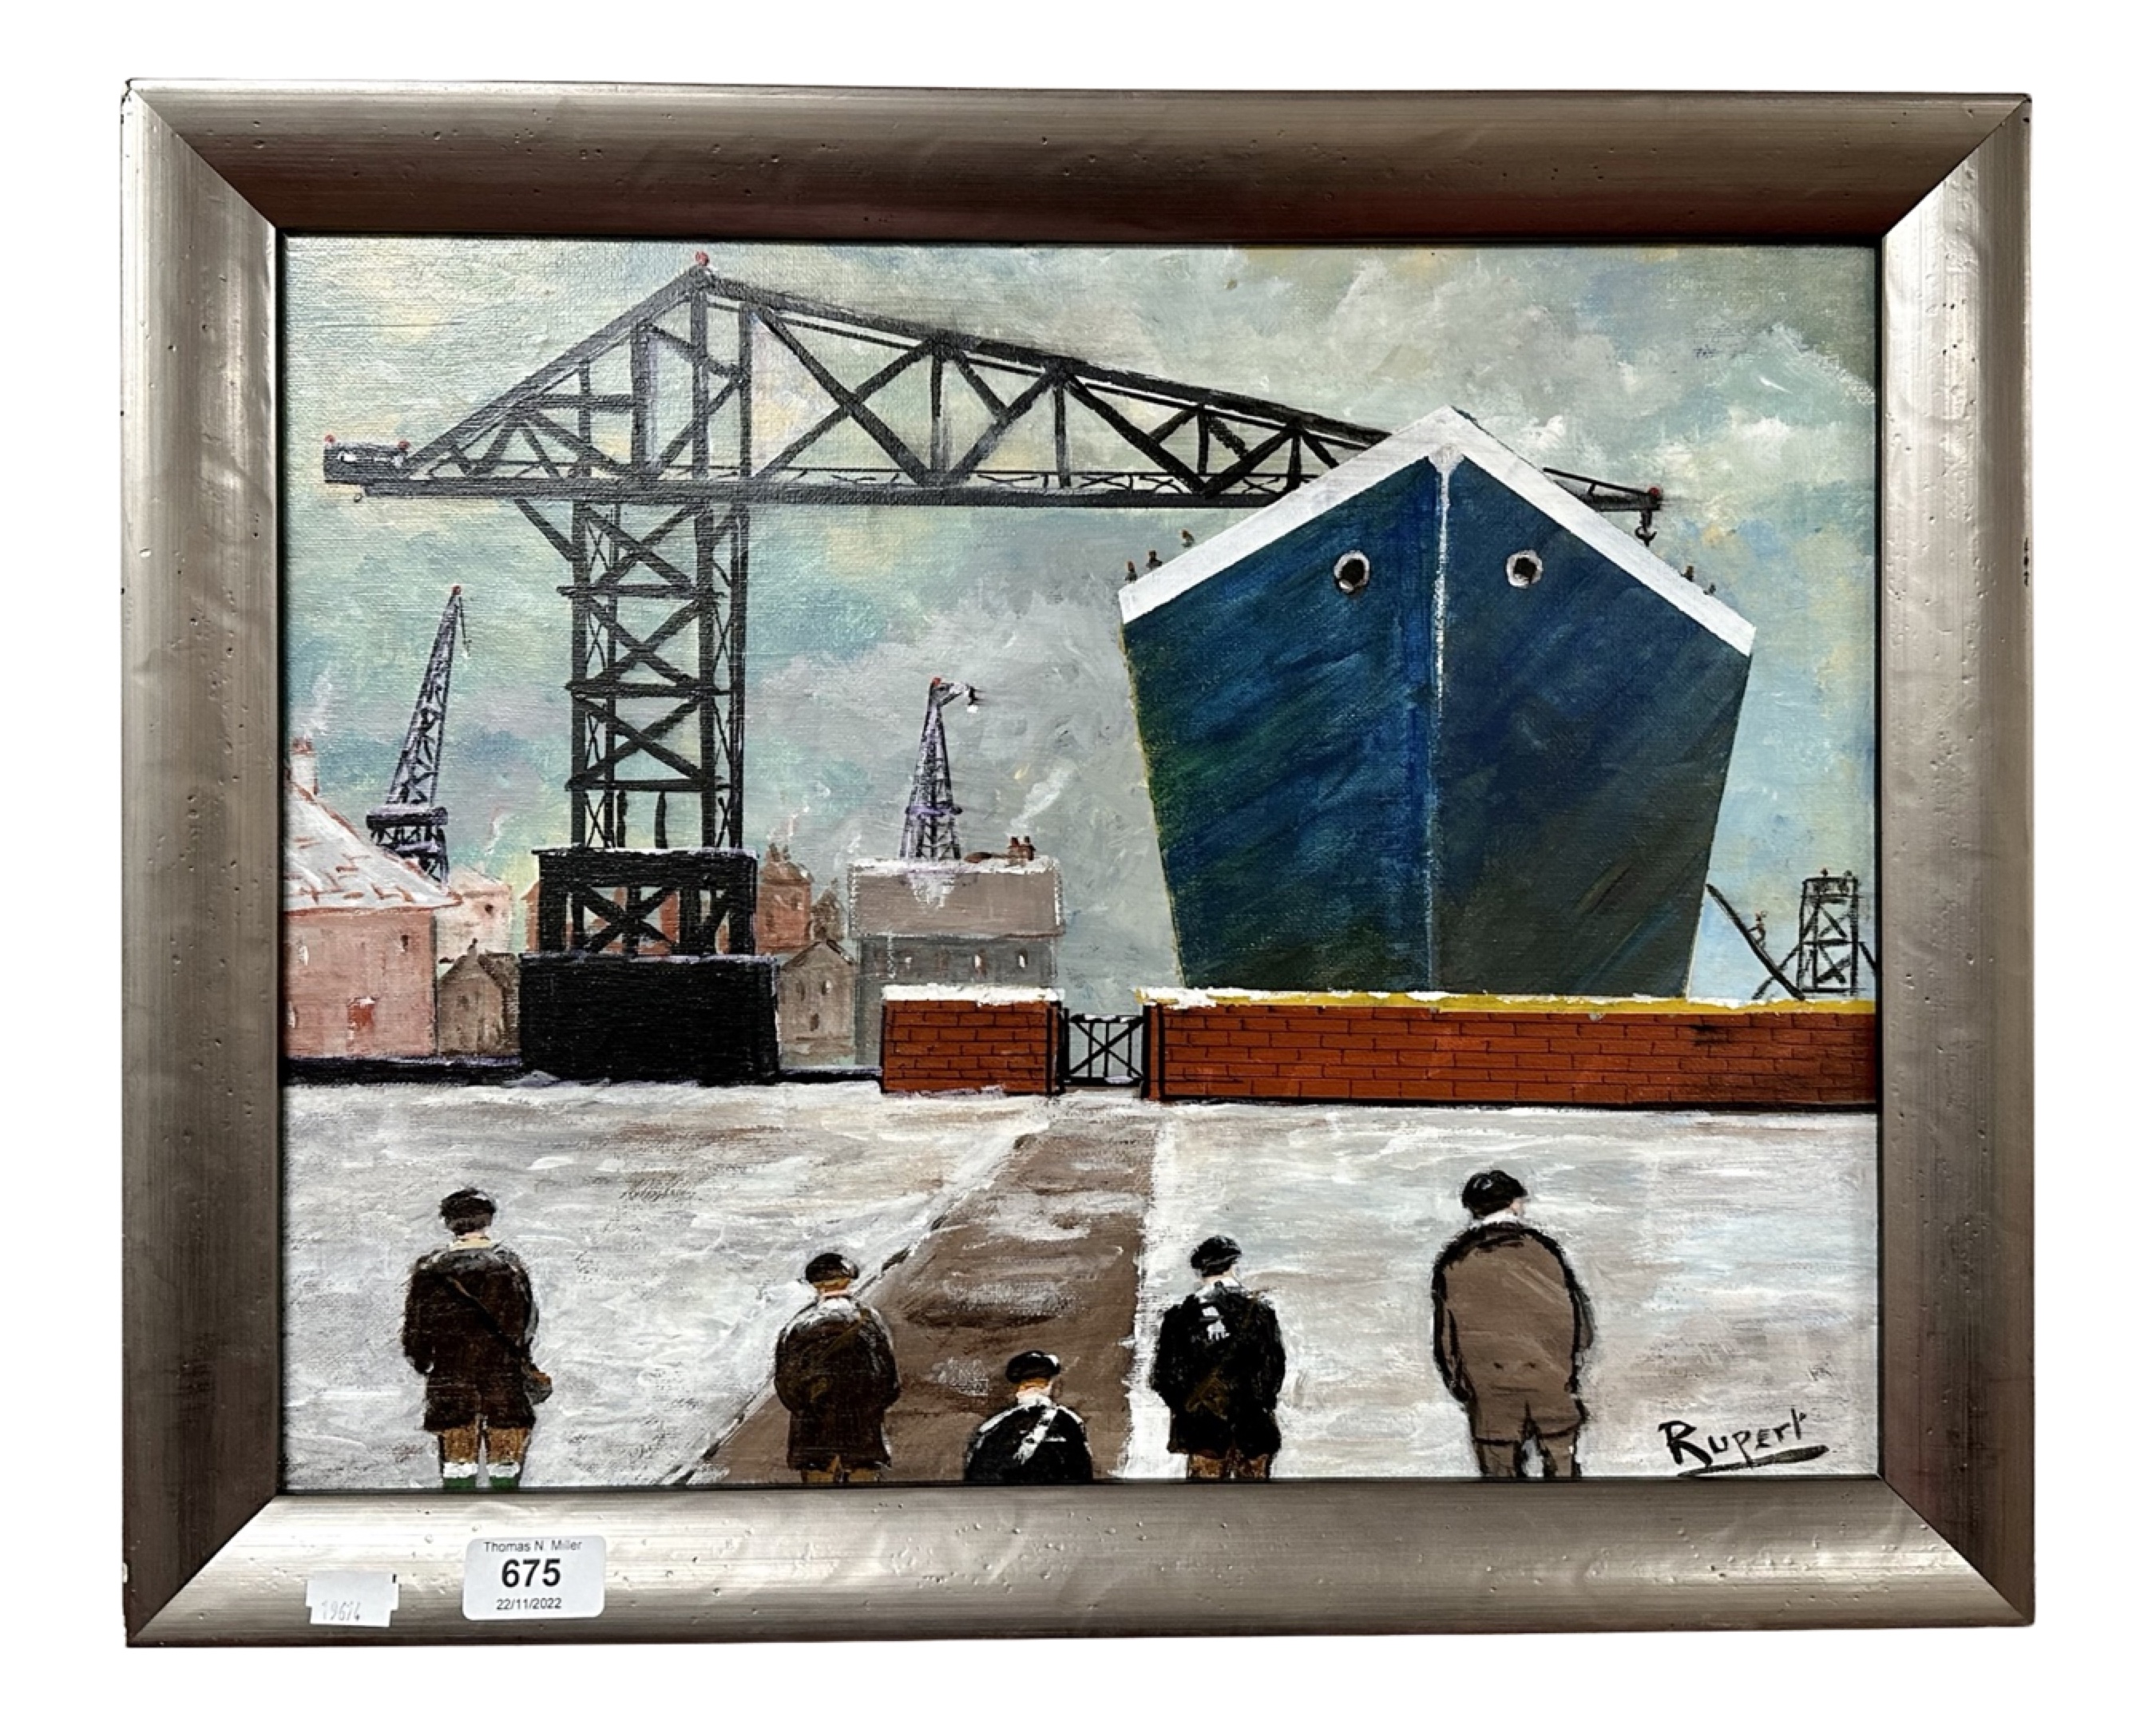 Rupert : Figures in a shipyard, oil on canvas, 45cm by 35cm.